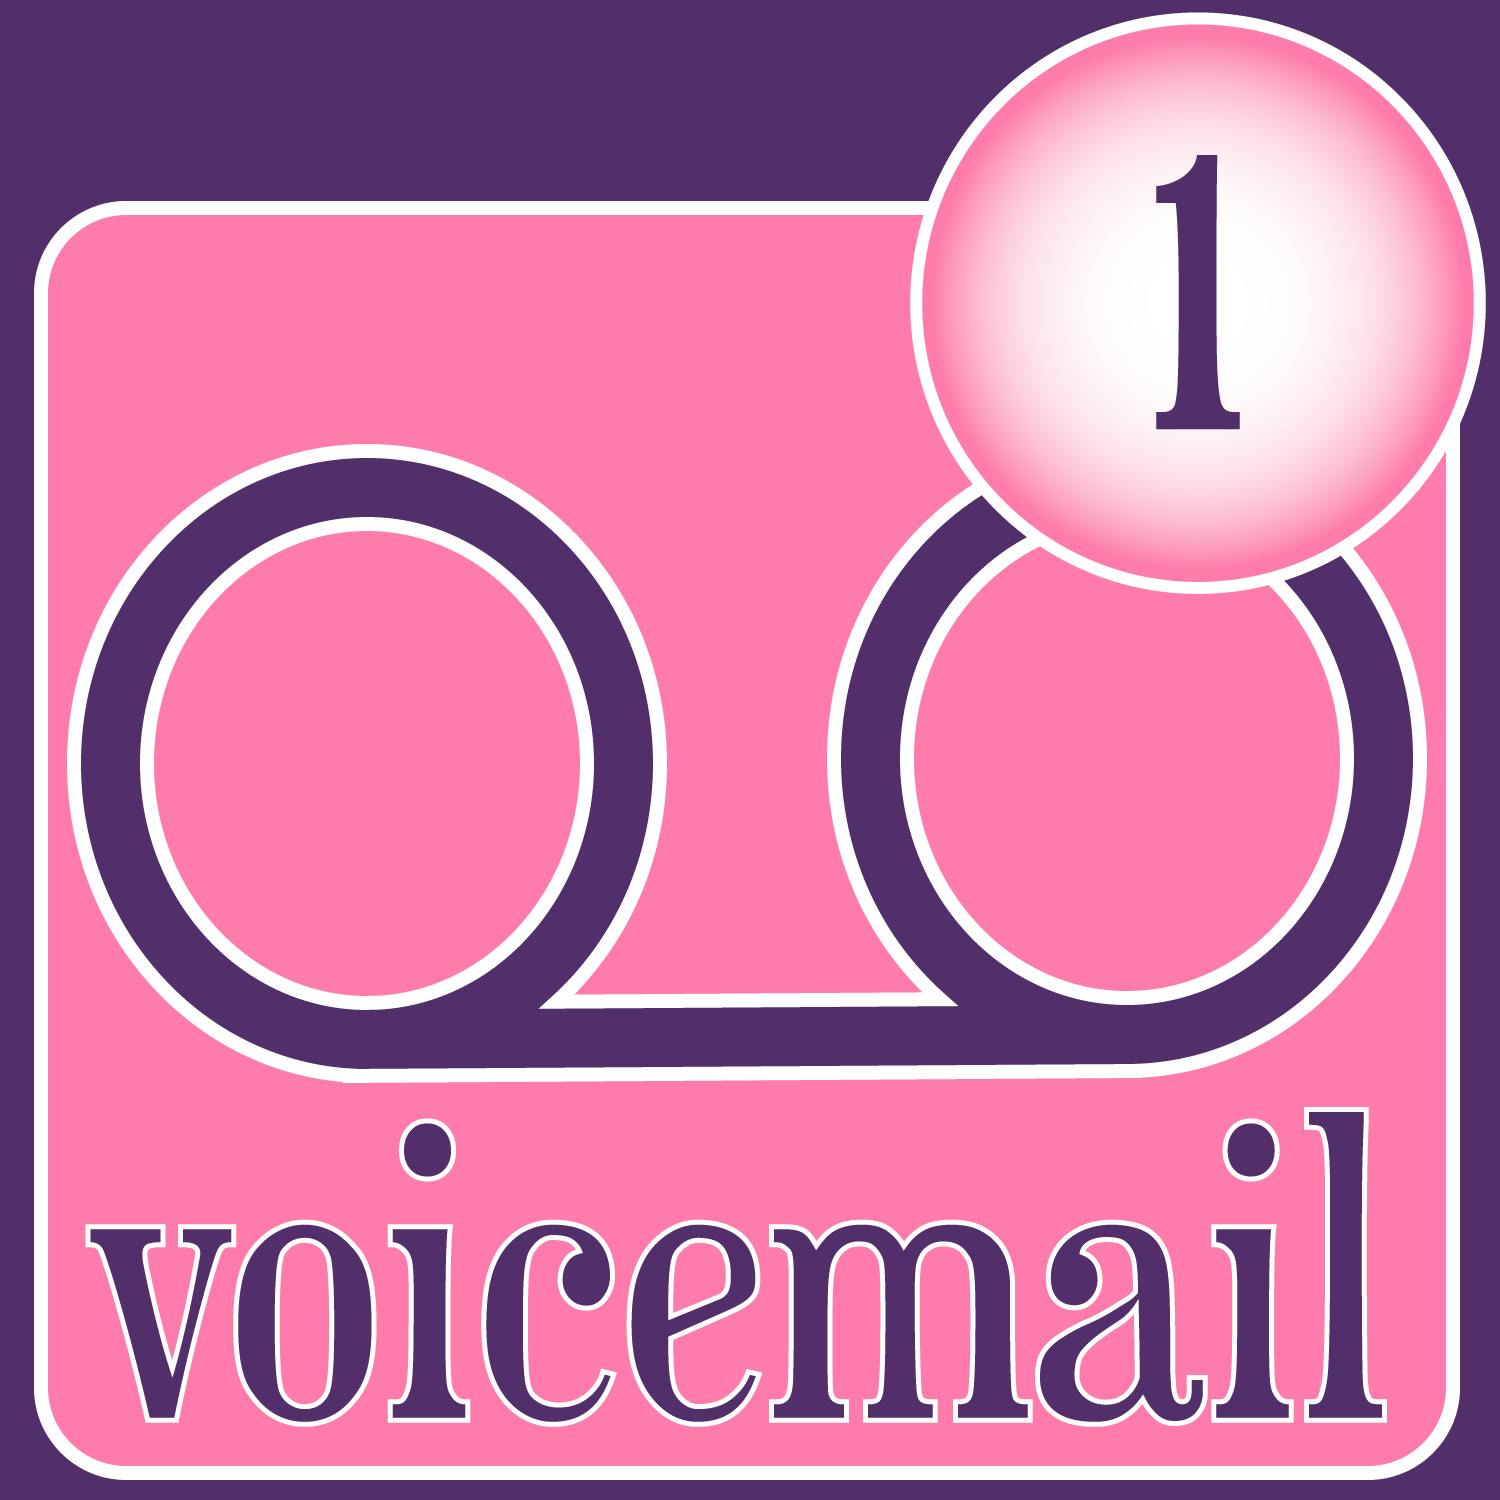 You Have (1) New Voicemail From Bridgette Milsen